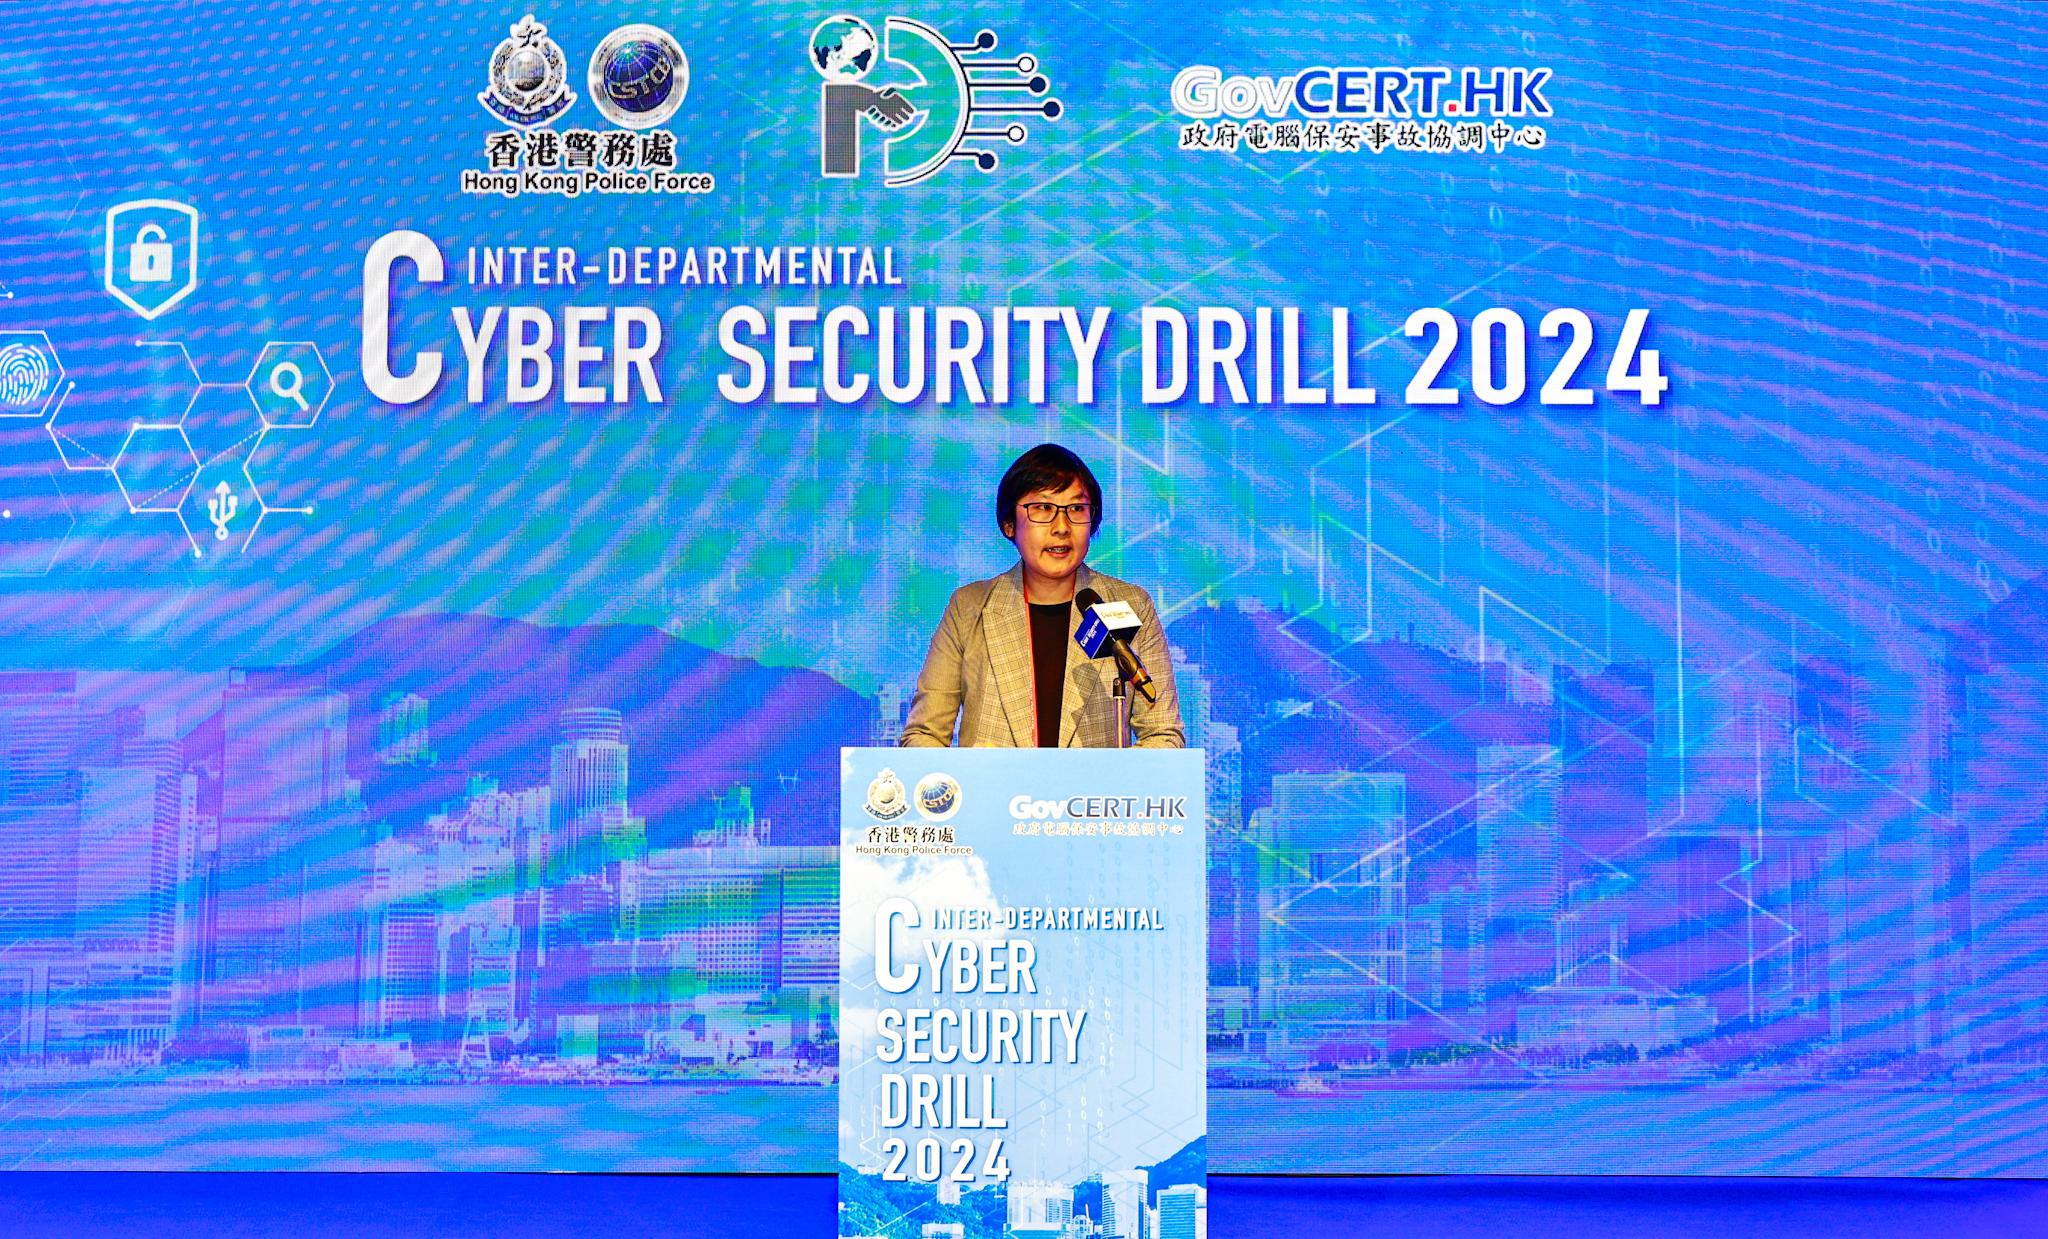 The Government Computer Emergency Response Team Hong Kong under the Office of the Government Chief Information Officer and the Cyber Security and Technology Crime Bureau of the Hong Kong Police Force co-organised the 8th Inter-departmental Cyber Security Drill today (April 25). Photo shows the Assistant Commissioner of Police (Crime), Ms Chung Wing-man, delivering opening remarks.